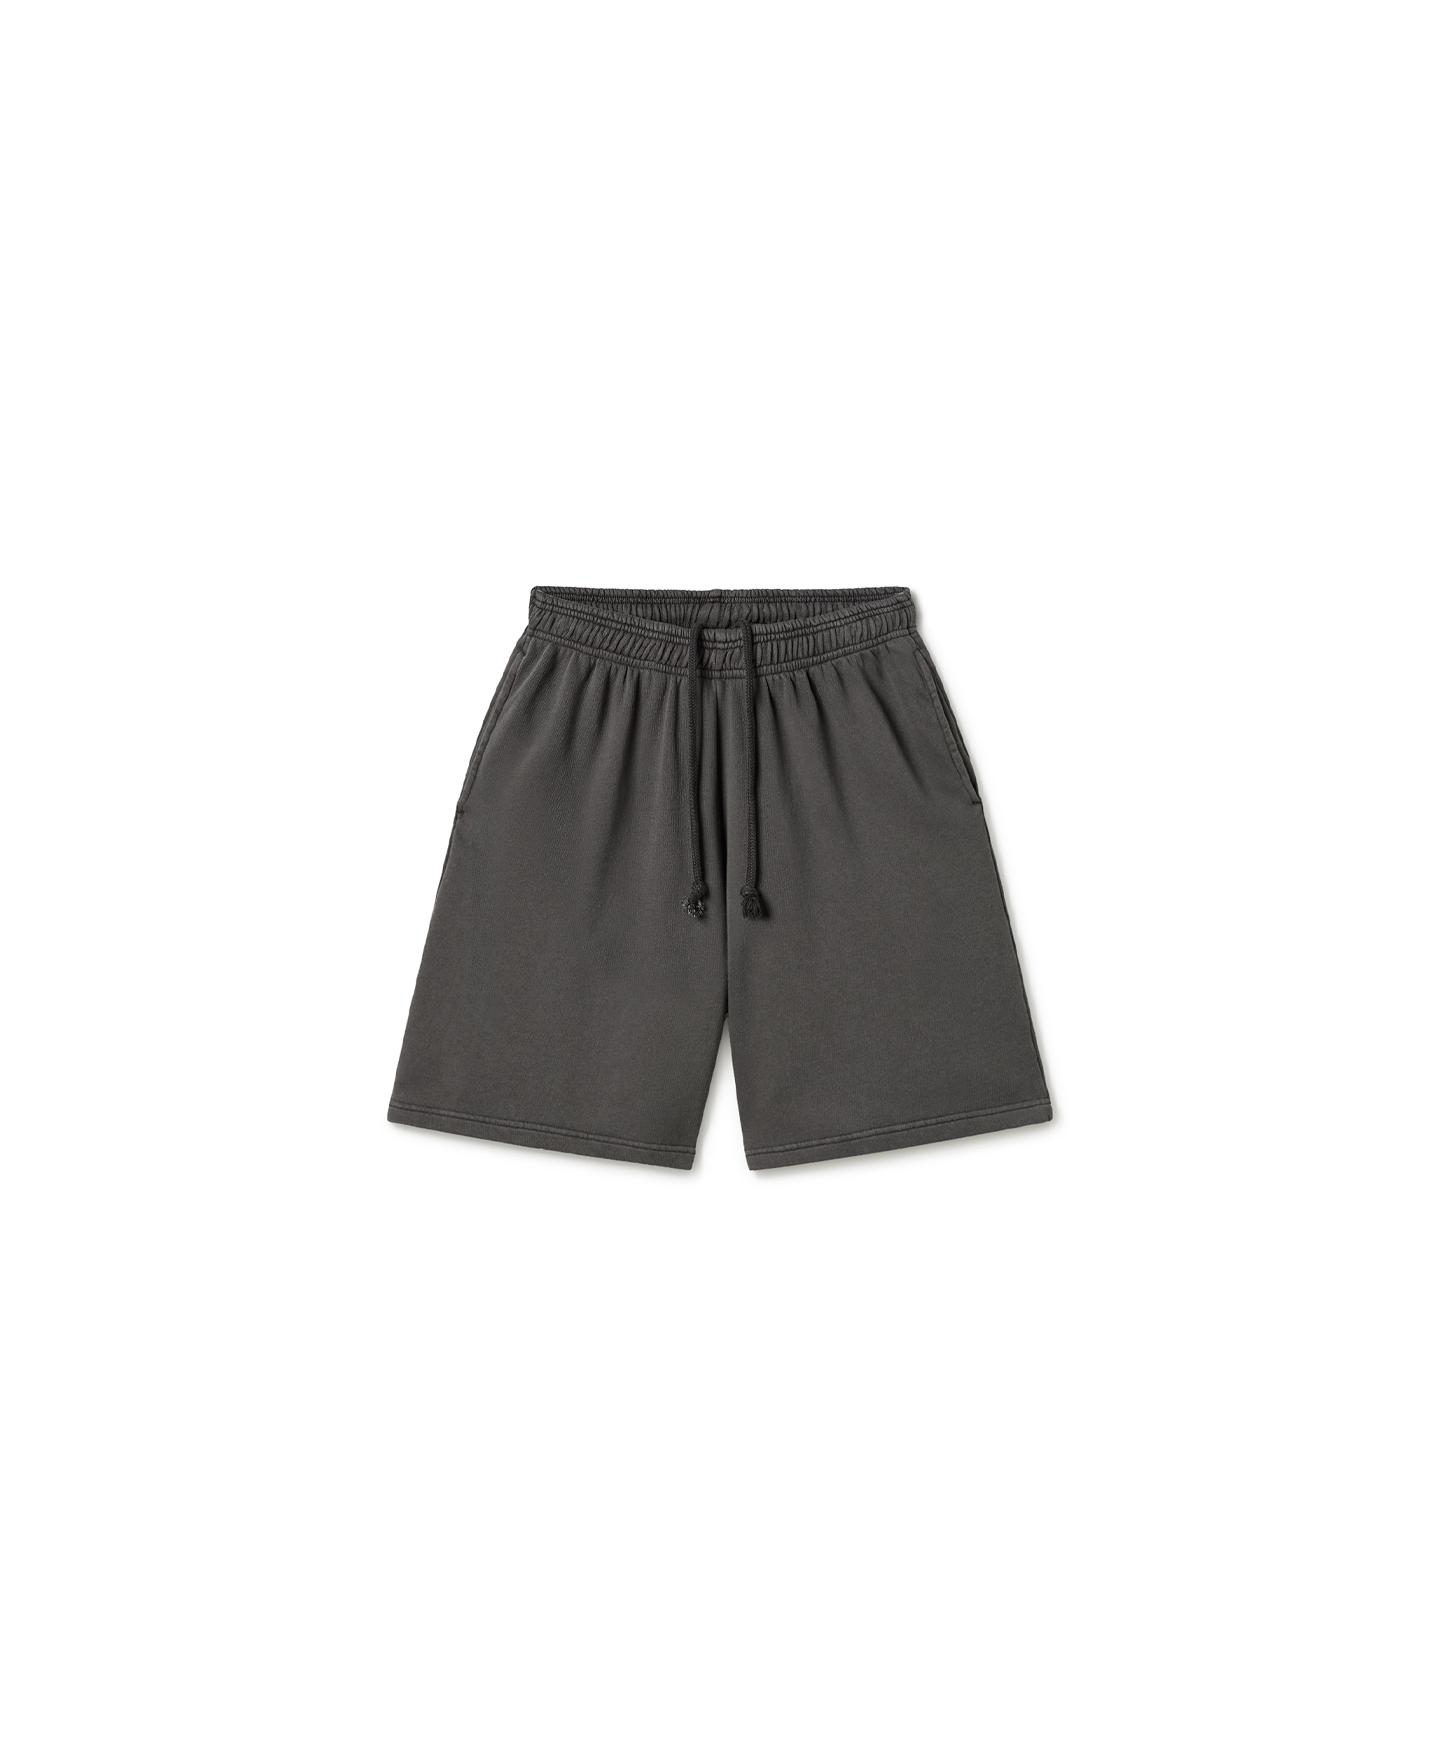 350 GSM 'Anthracite' Short Pants